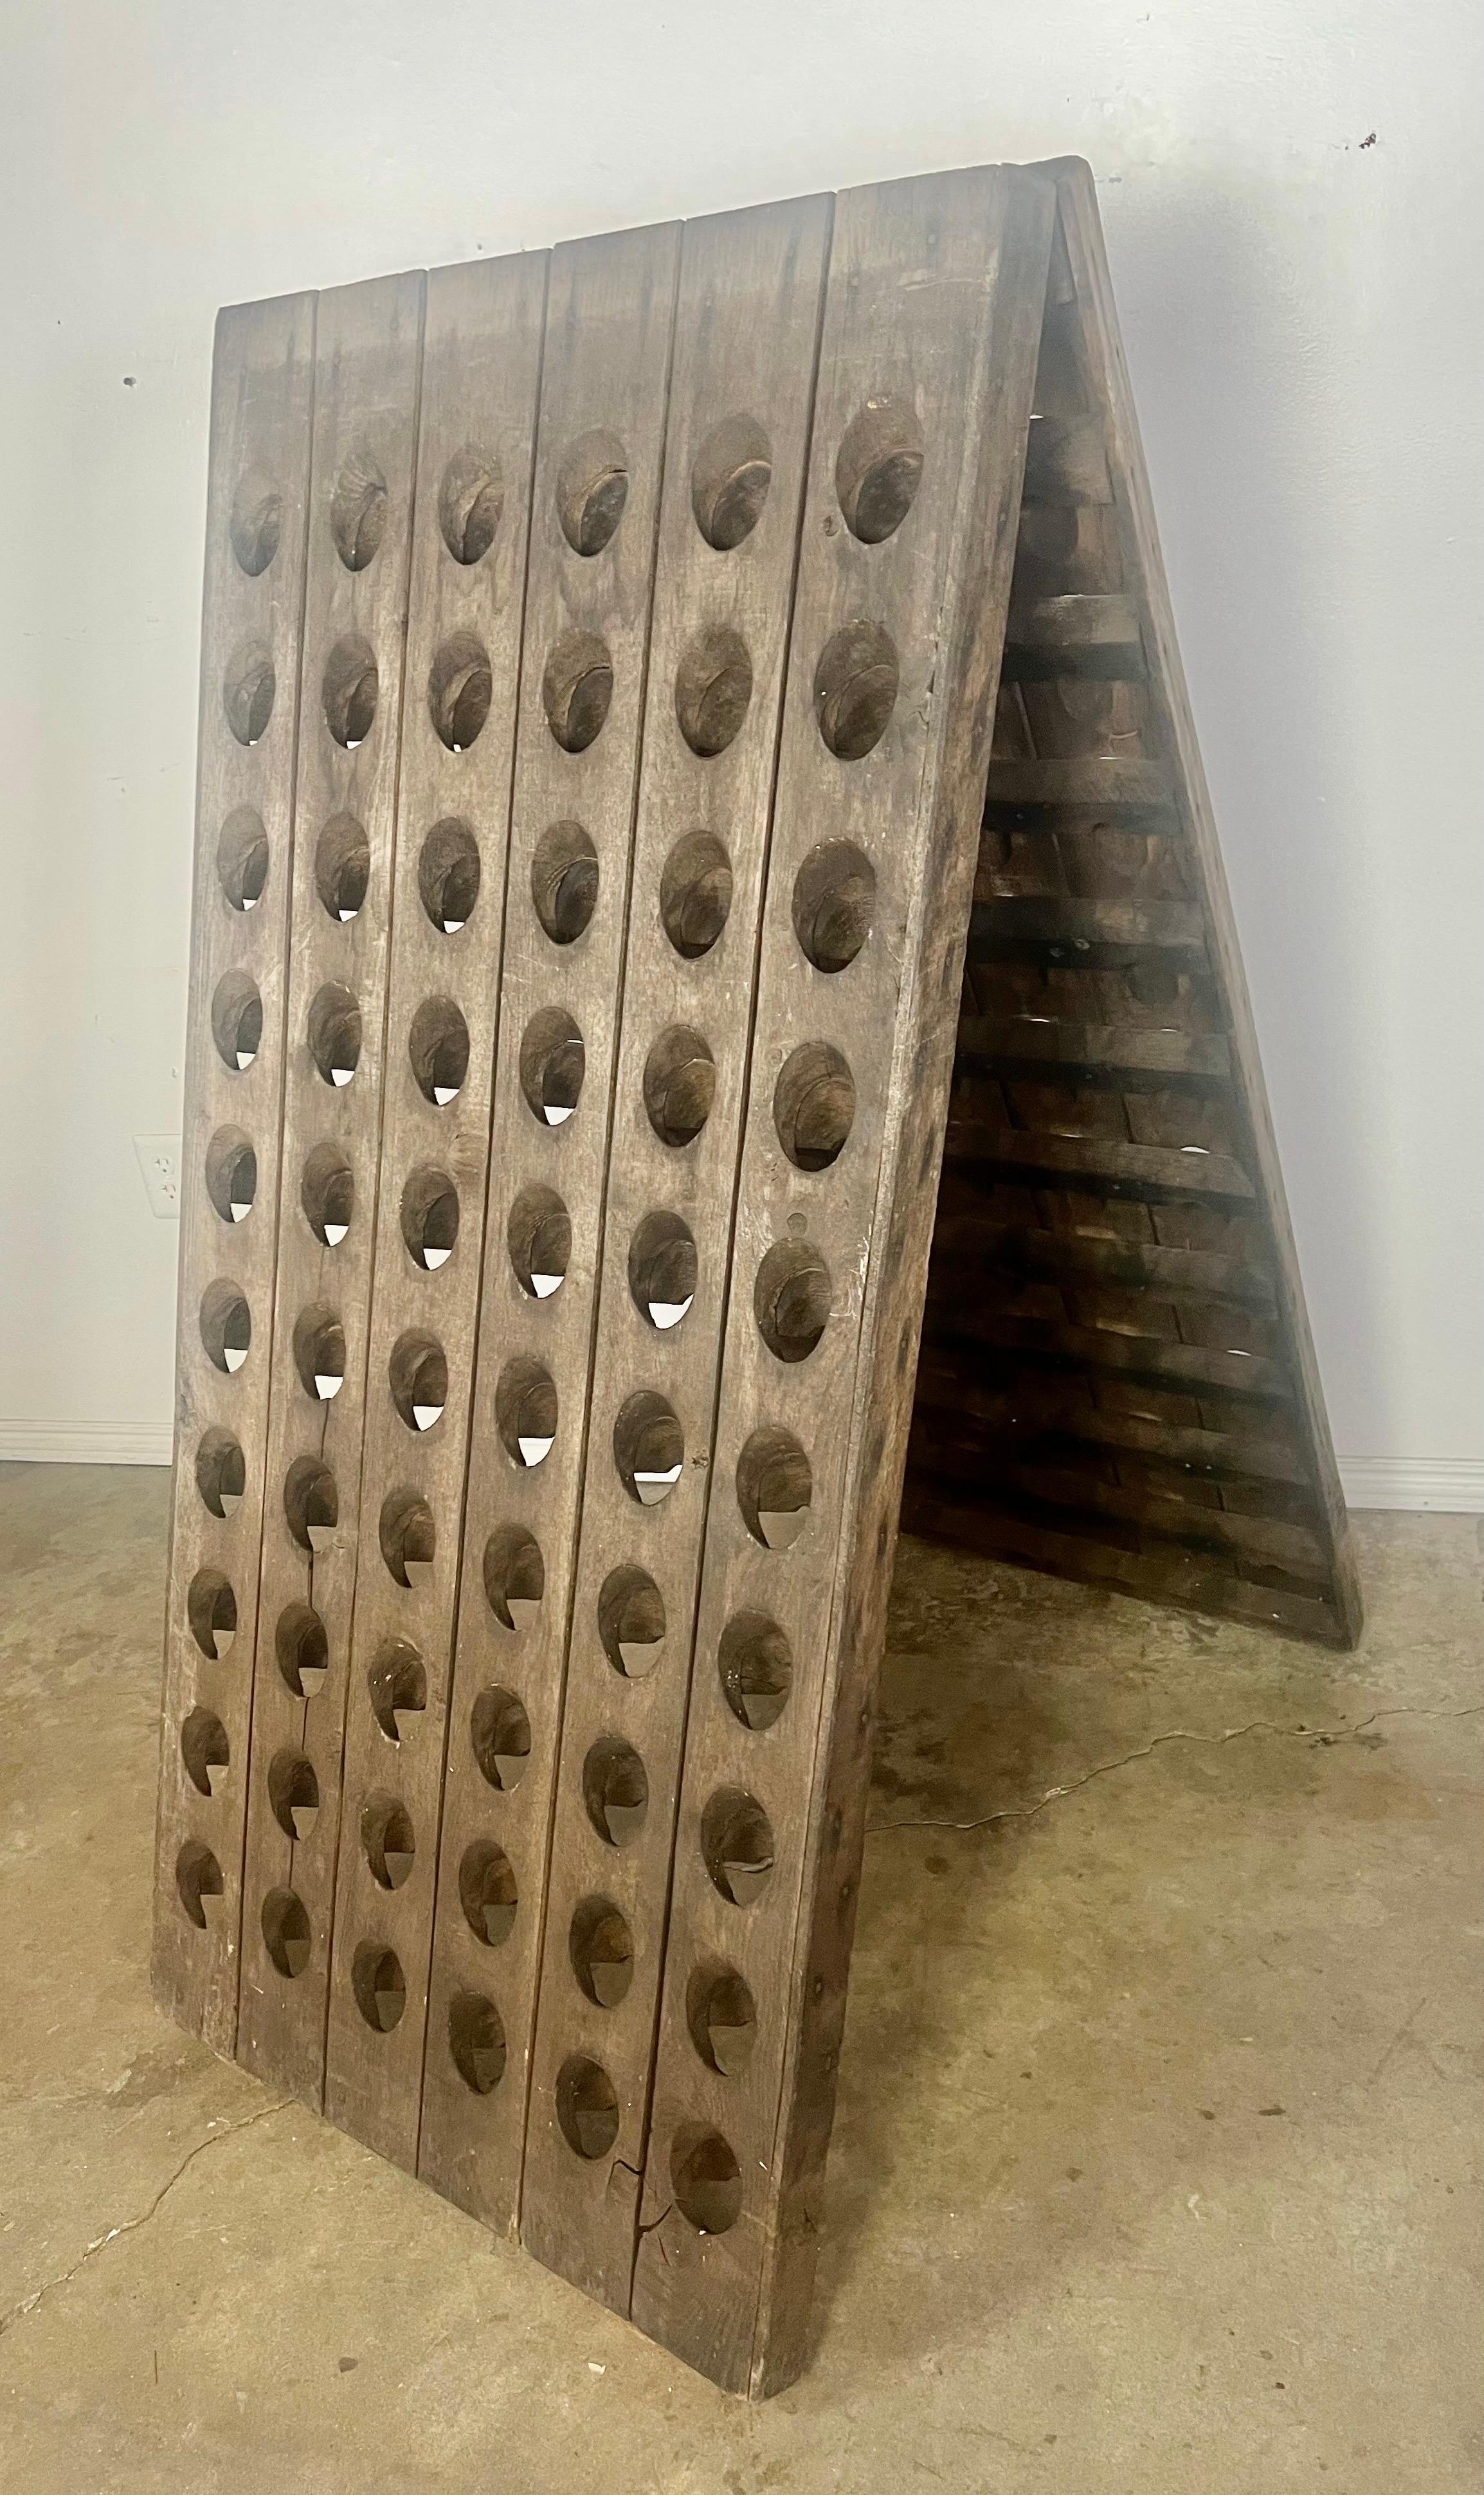 Unique two sided French wine rack that holds 120 bottles of wine.  From the side it has an adjustable frame depending on your needs.  The oak has been beautifully weathered.